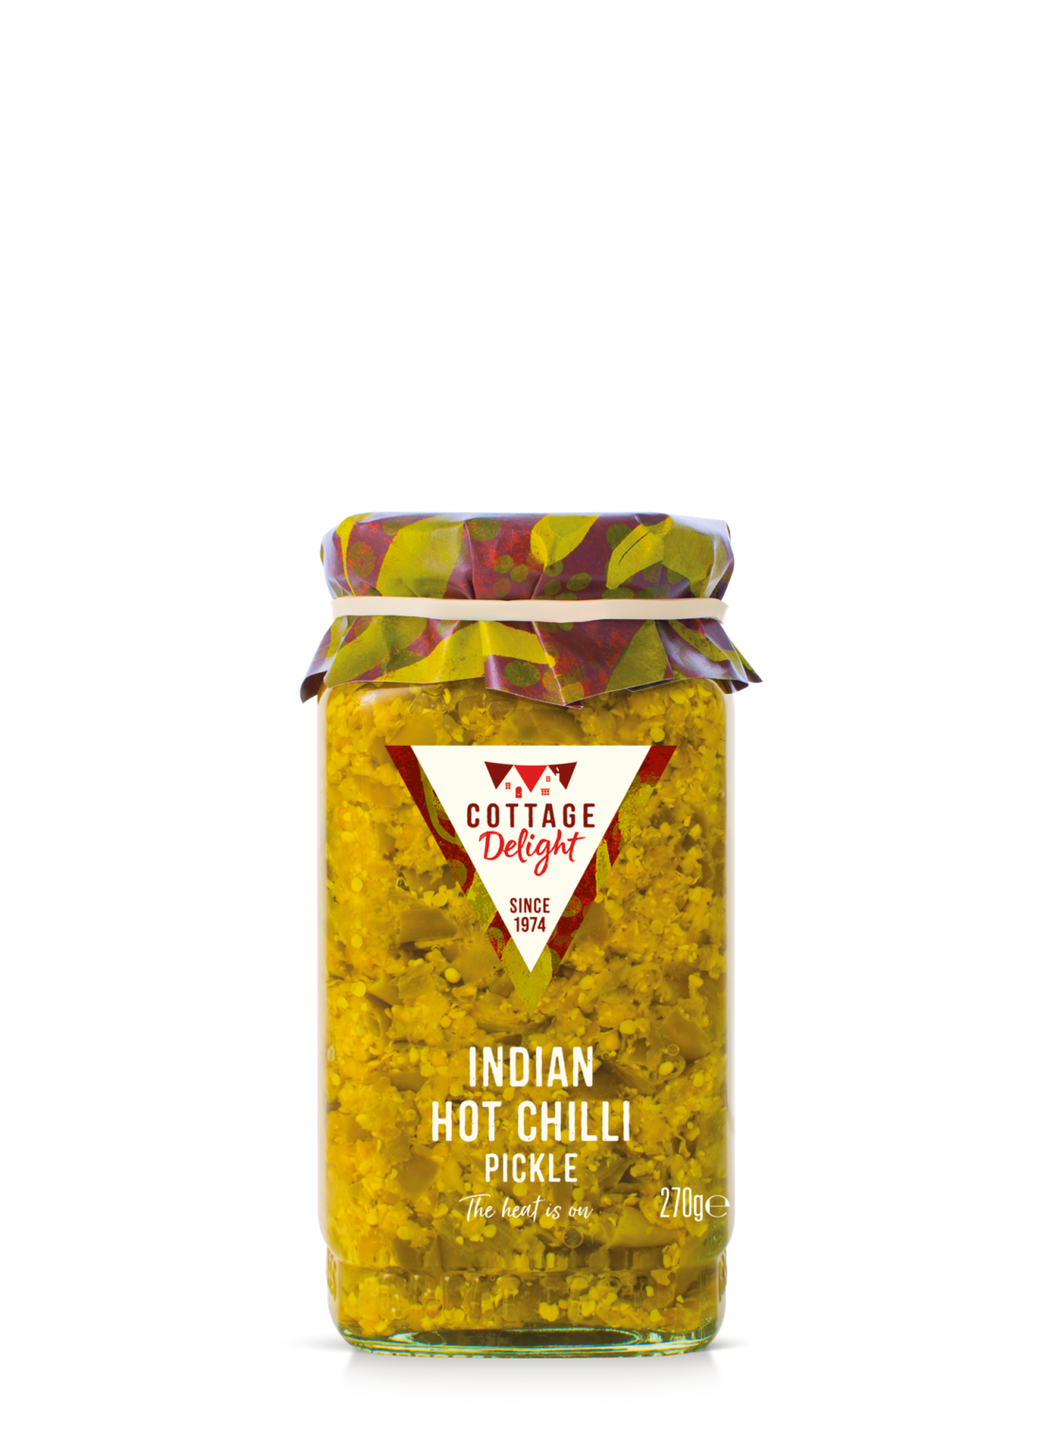 Indian hot chilli pickle